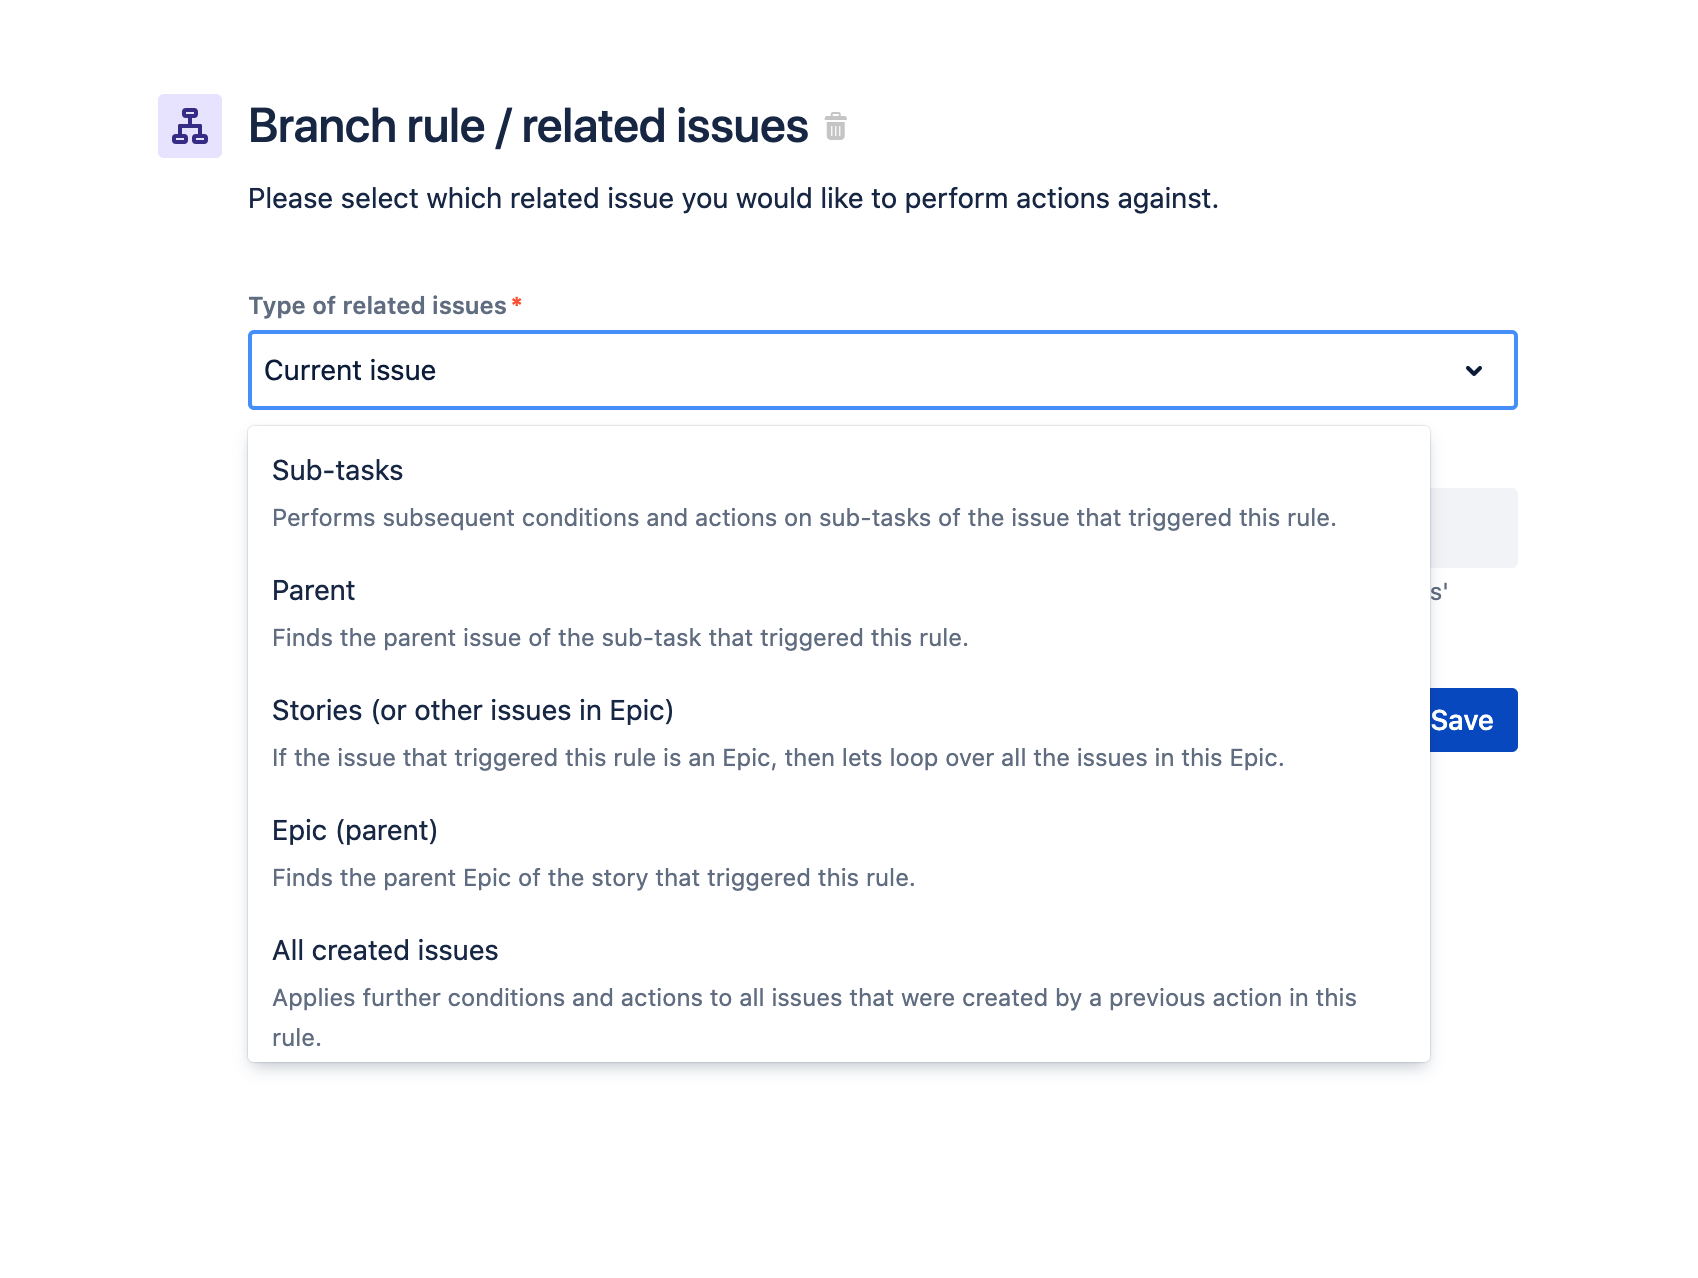 Related issues branch in Jira automation. Shows a dropdown menu with various options for related issues.